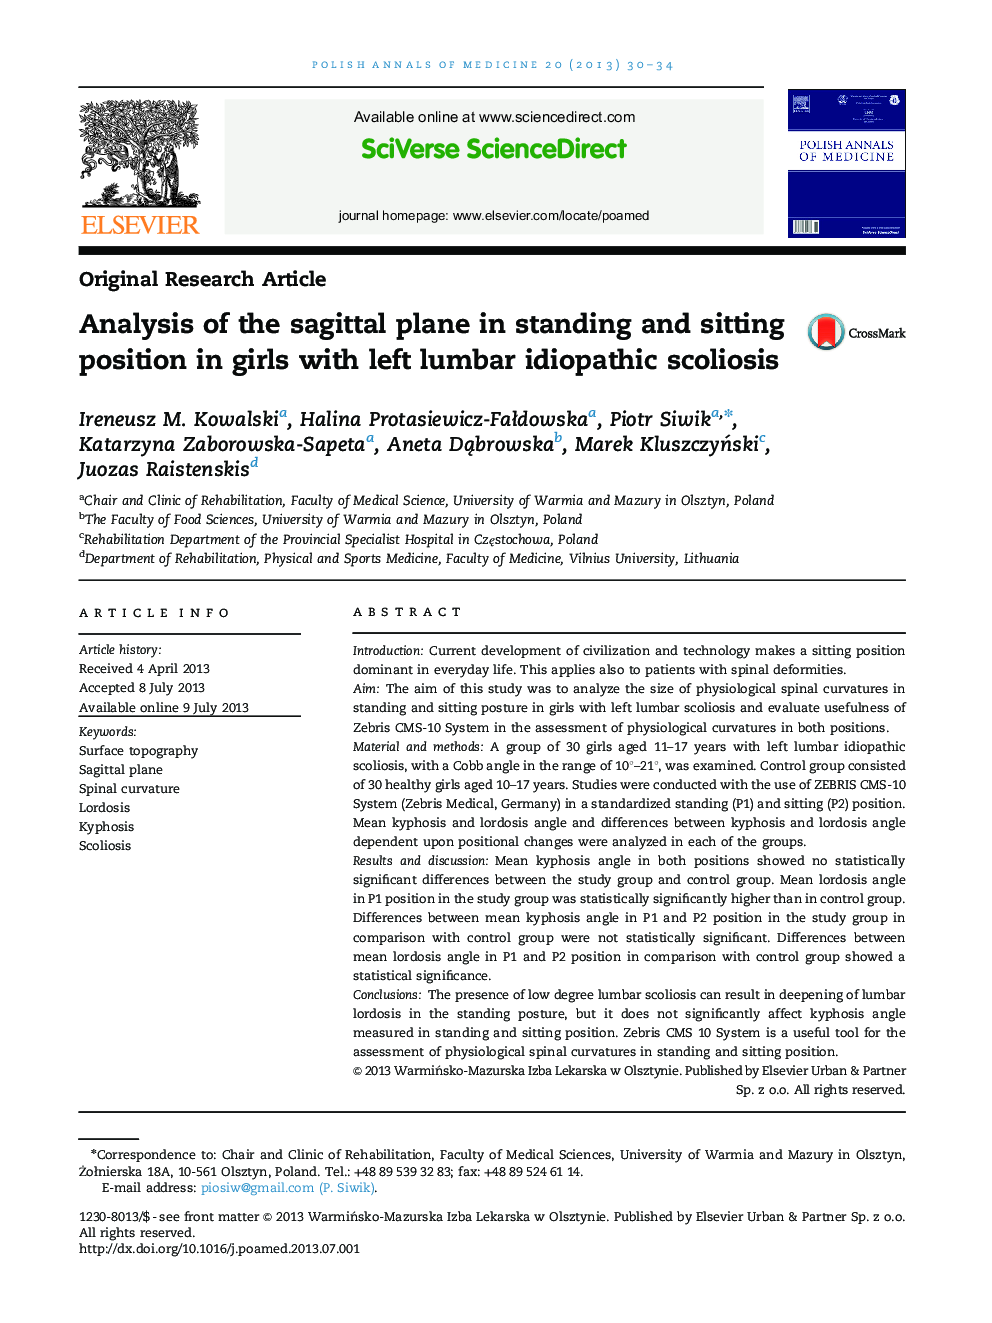 Analysis of the sagittal plane in standing and sitting position in girls with left lumbar idiopathic scoliosis